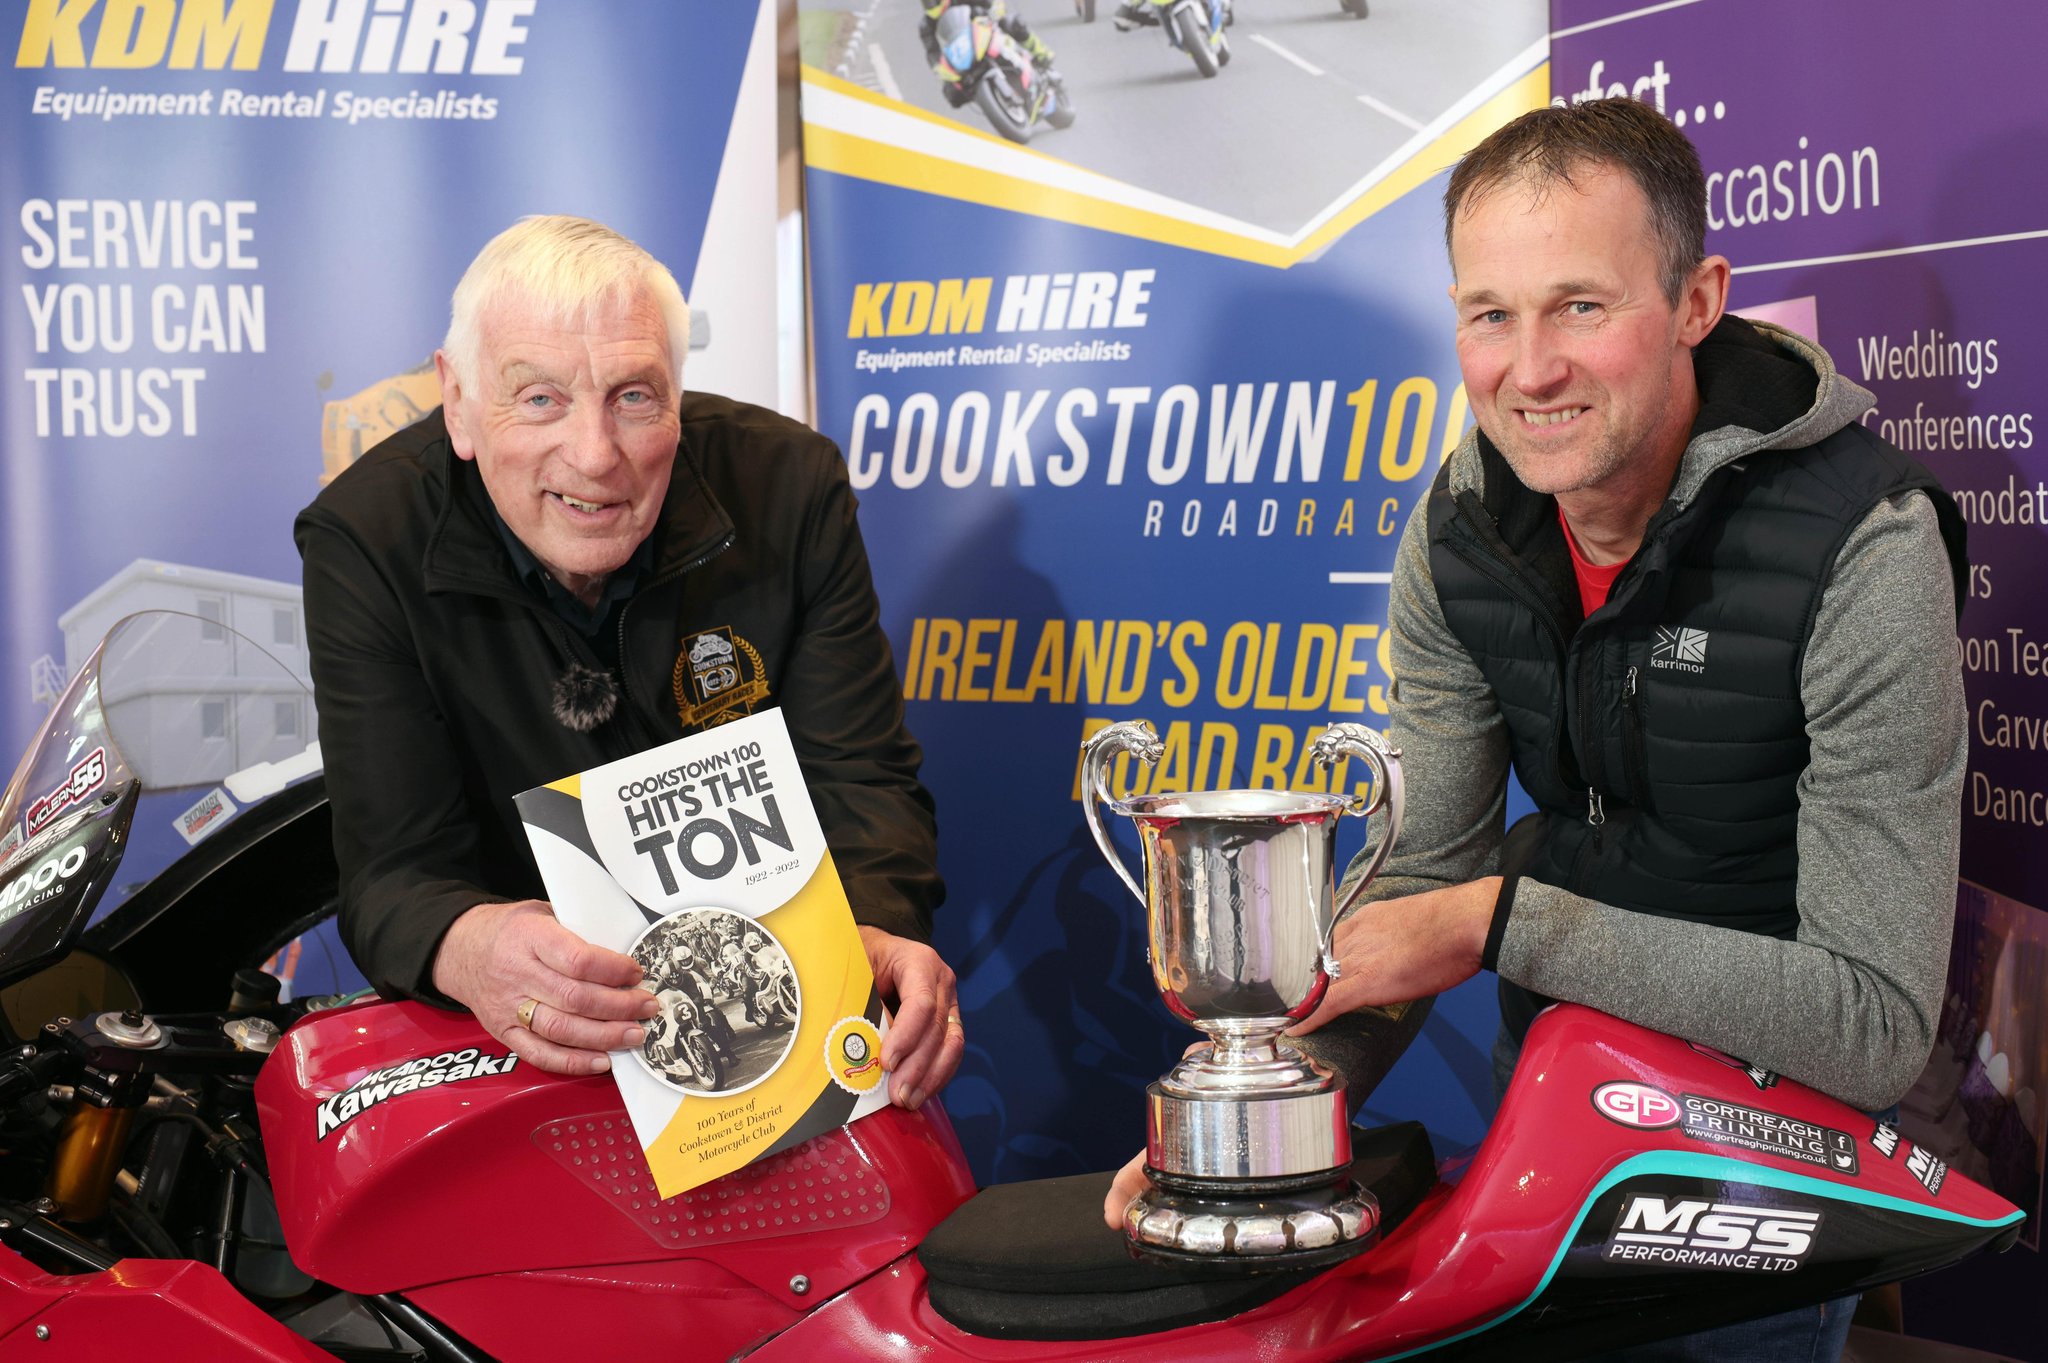 Michael Sweeney aiming to make amends at Cookstown 100